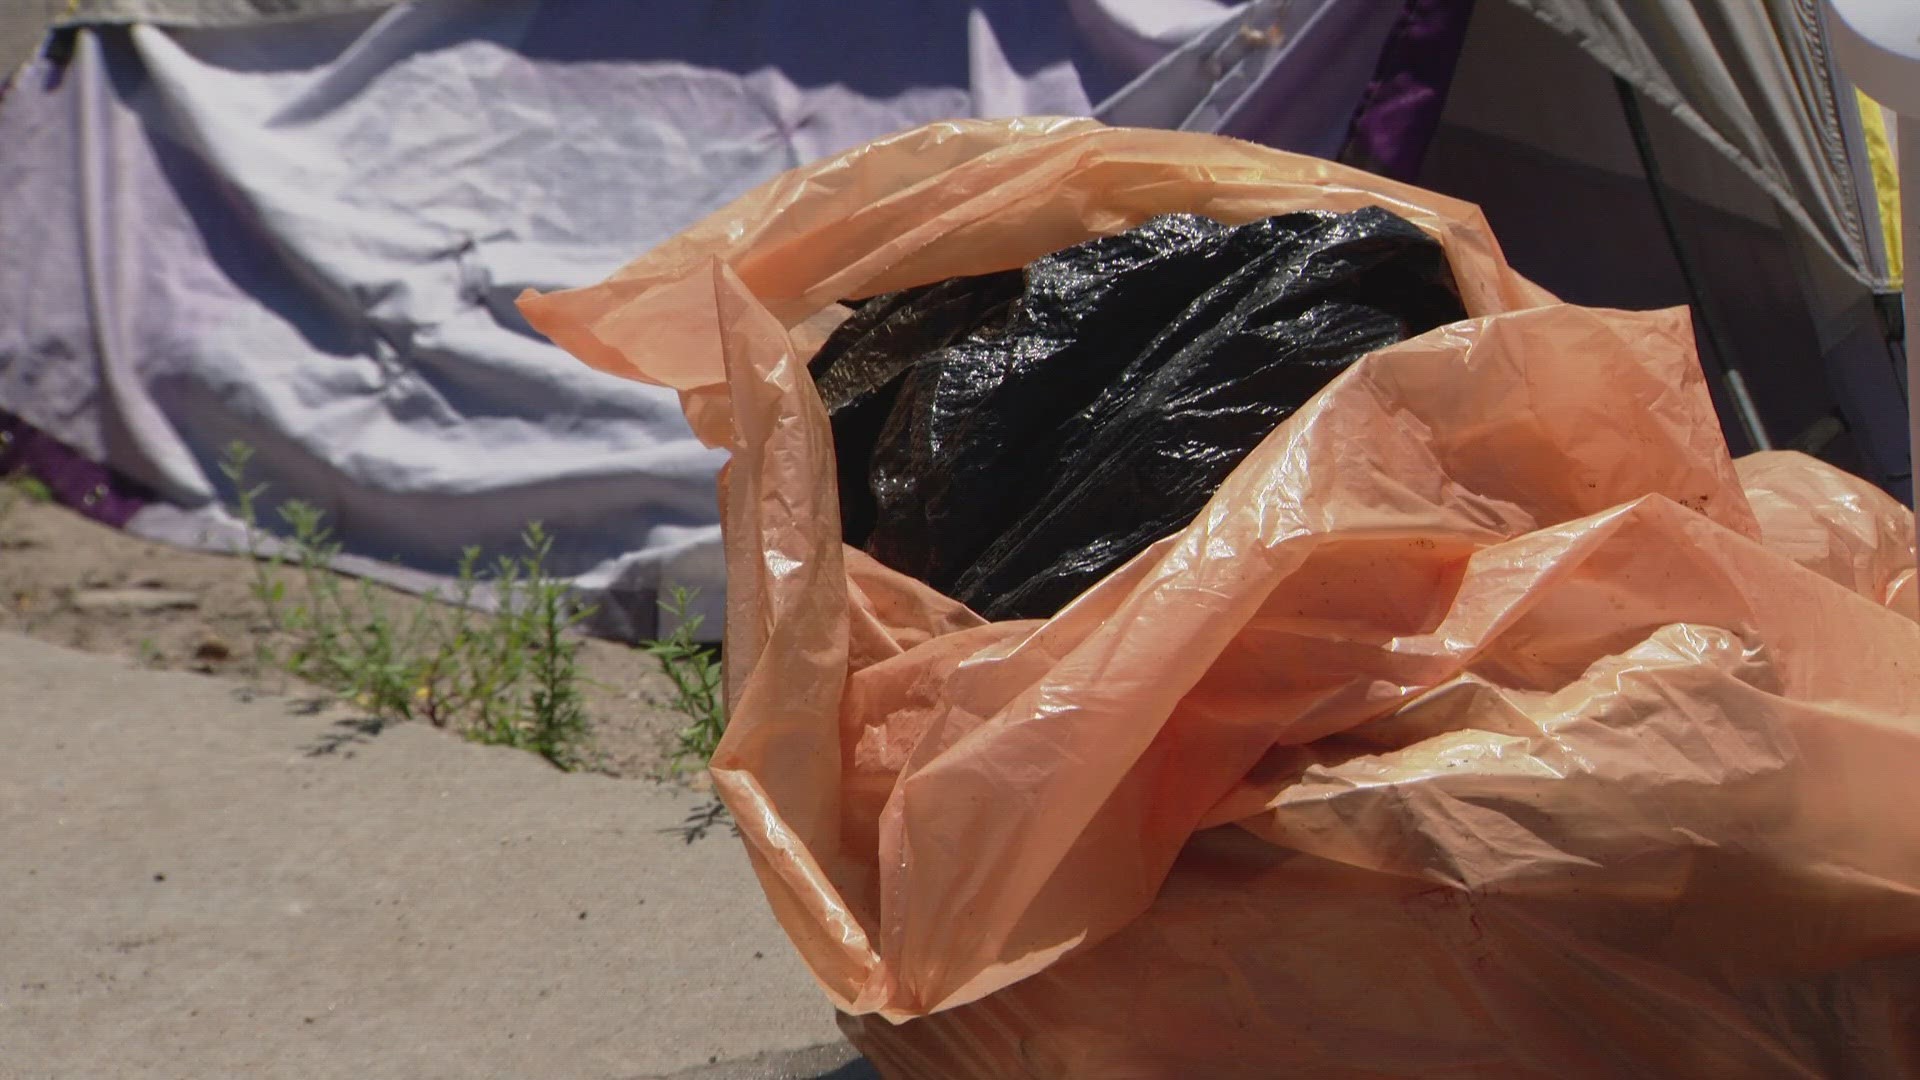 Denver says trash pick up will happen every Monday and Thursday at the encampments at 8th and Grant and 16th and Logan.